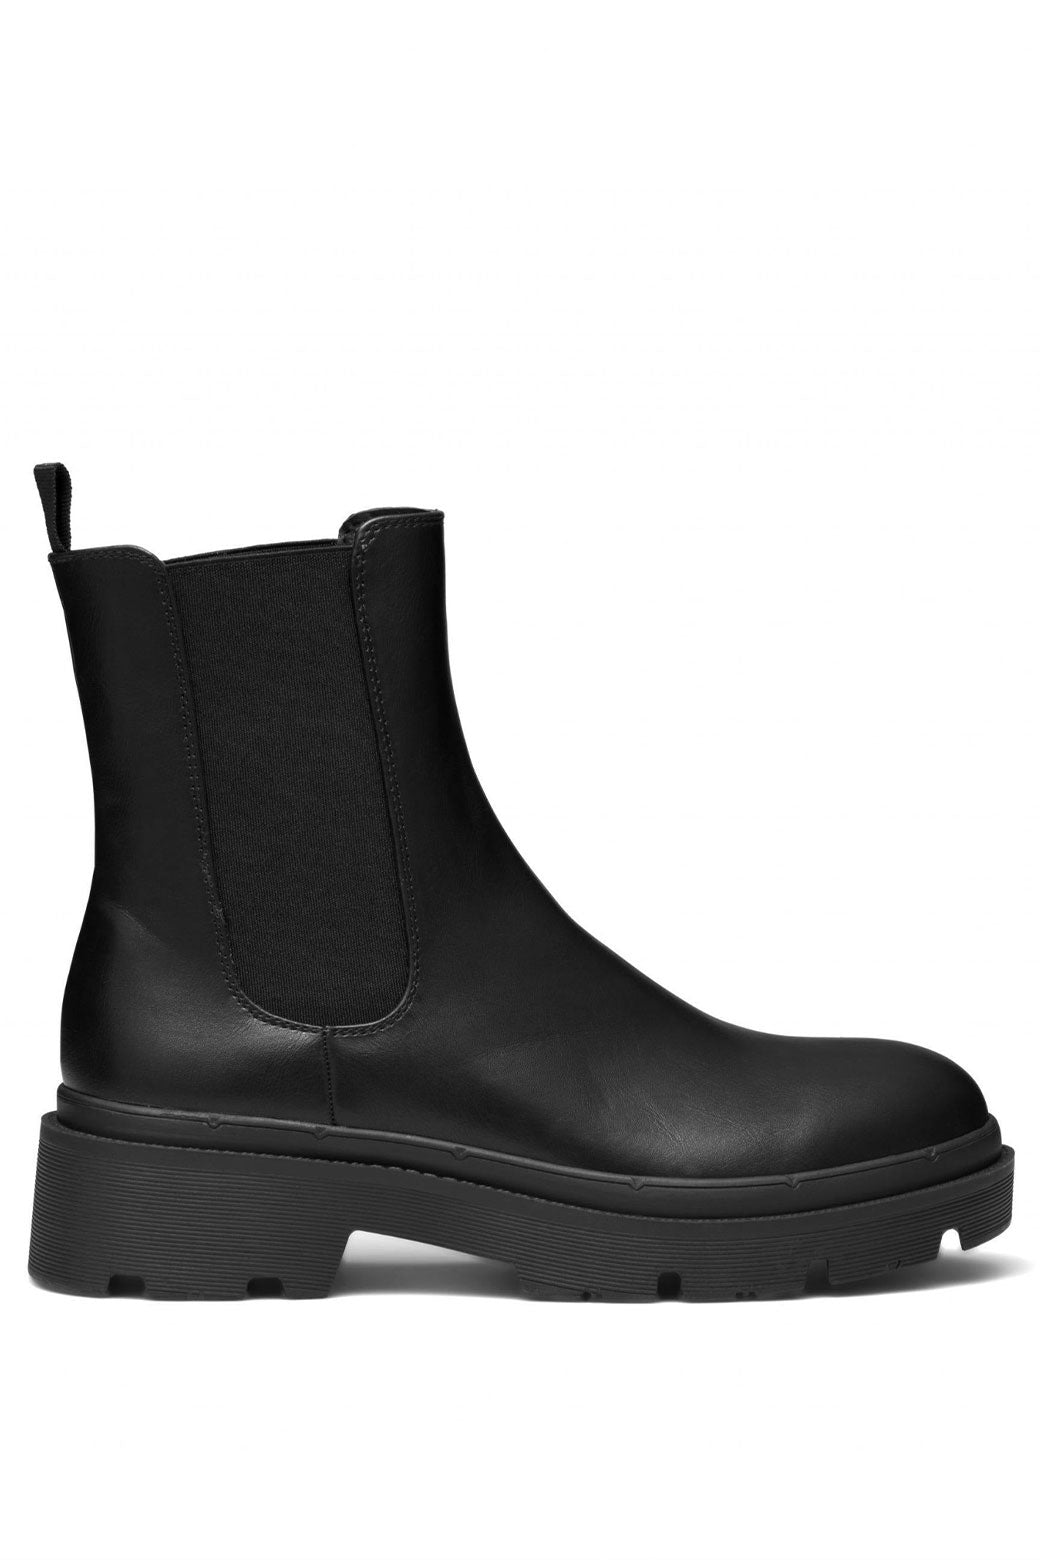 FINAL SALE Therapy Threadbo Boots Black